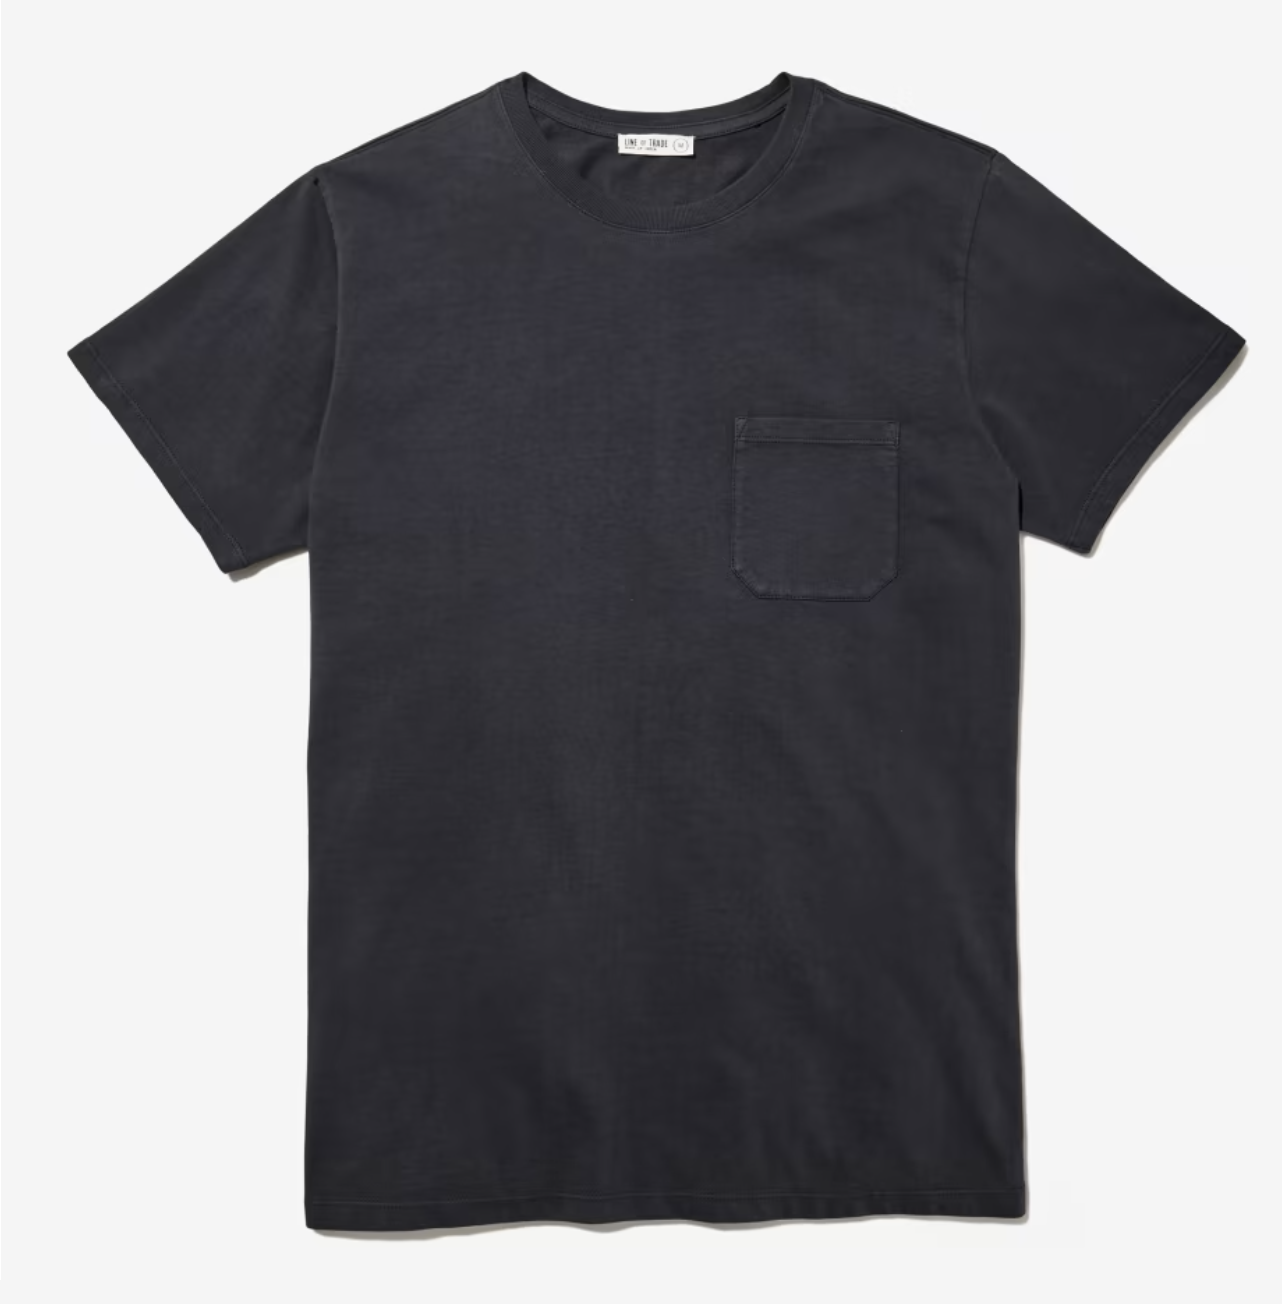 T-shirt with pocket in front